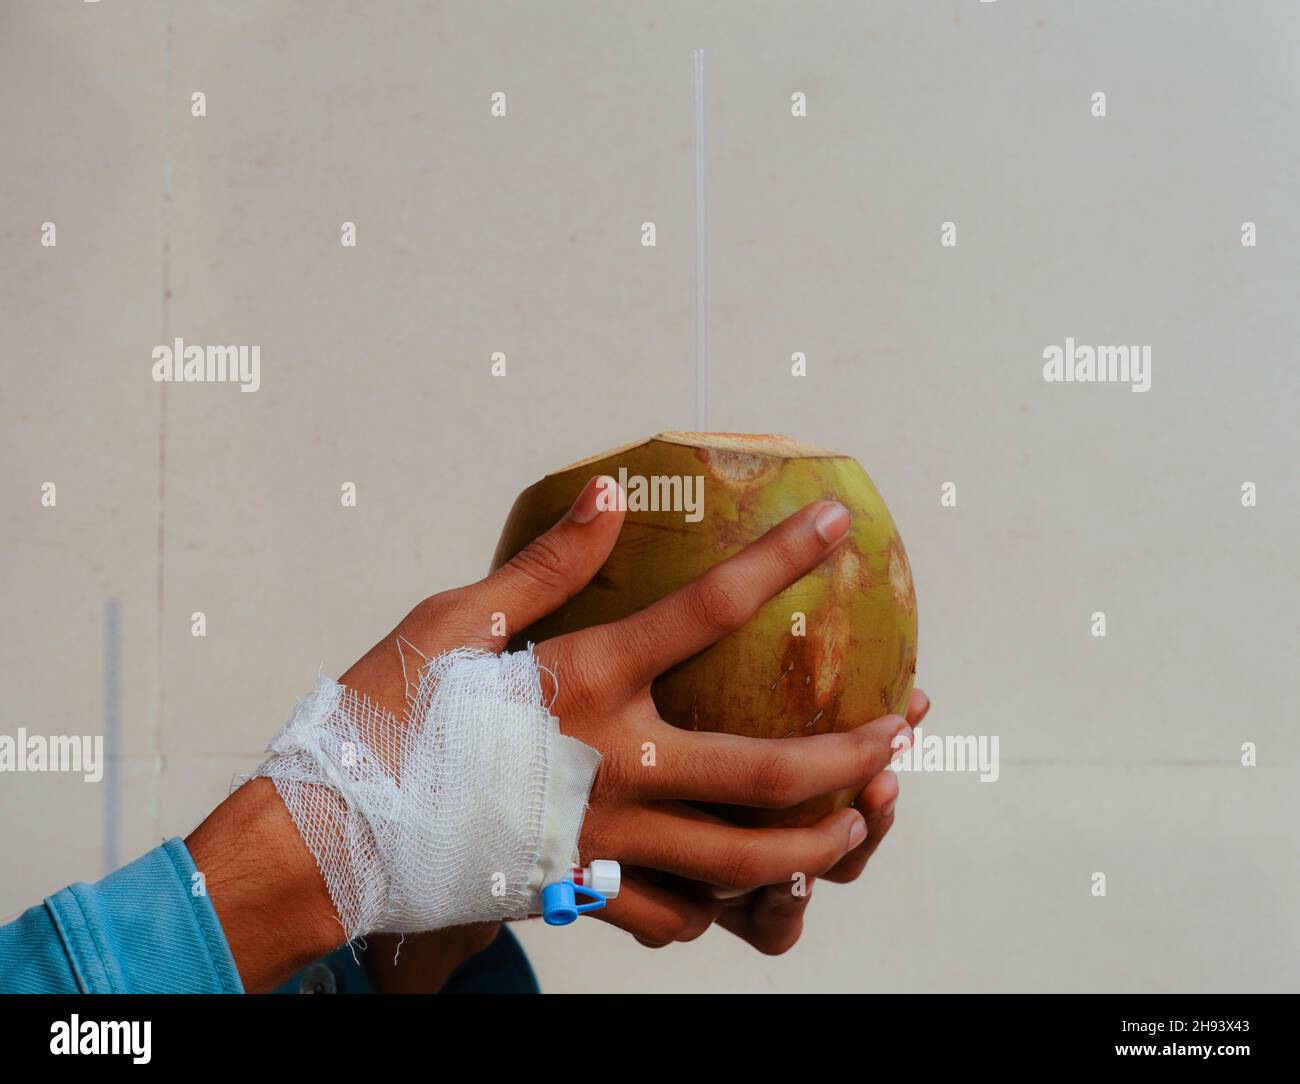 dengue treatment food coconut water in a patient hand Stock Photo